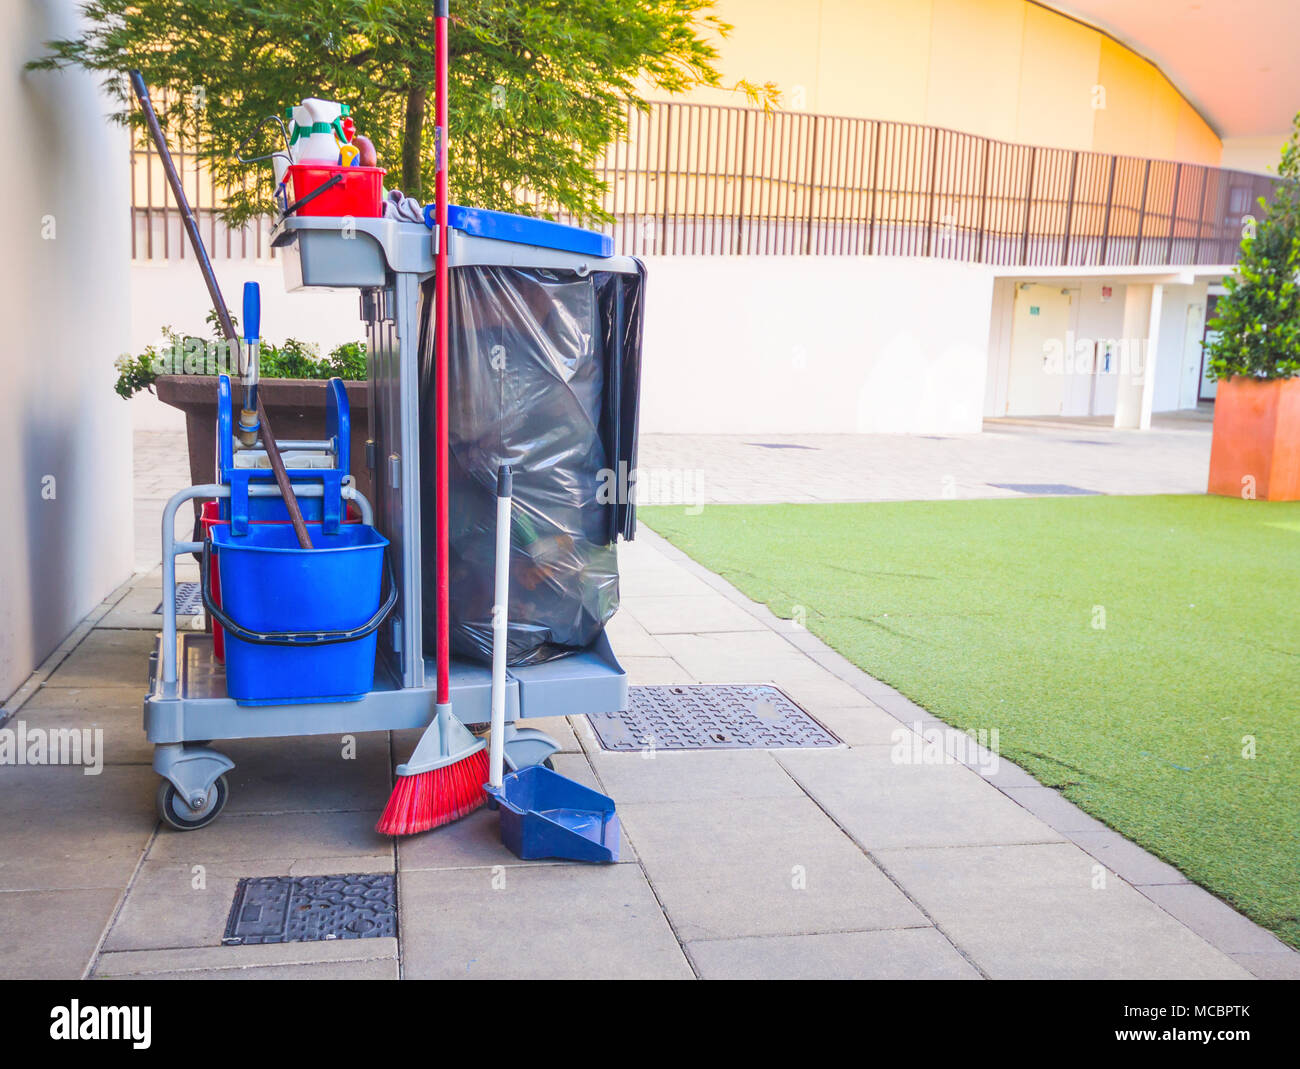 https://c8.alamy.com/comp/MCBPTK/cleaning-suppliescommercial-cleaning-equipment-with-cartprofessional-cleaning-equipment-as-mop-bucket-glove-cart-outdoor-MCBPTK.jpg